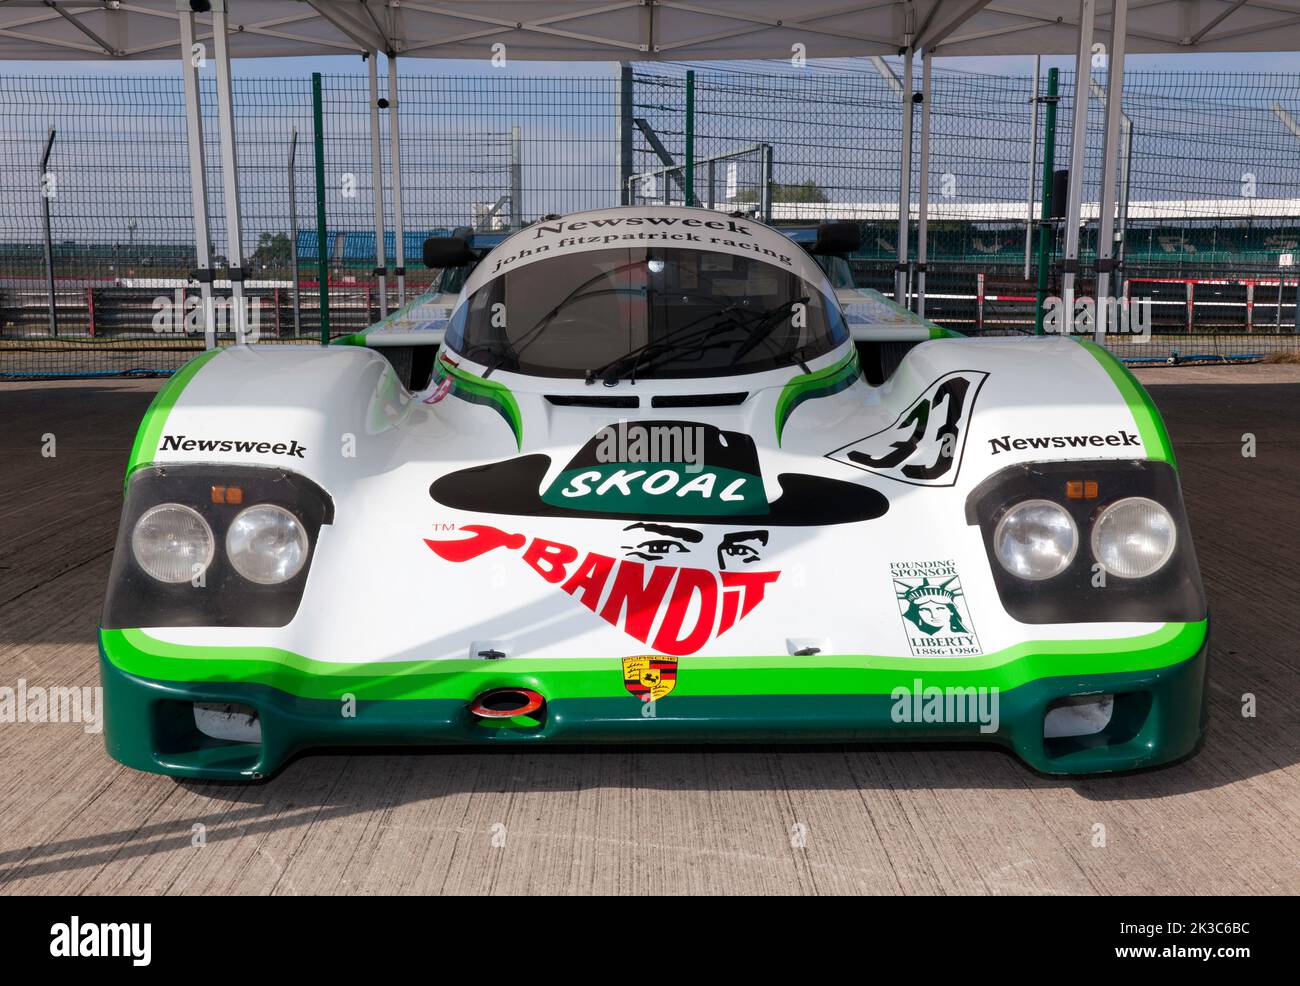 Front view of a1984, Porsche 956 in the Livery of Skoal Bandit, in  a special display Celebrating 40 years of Group C, at the Silverstone Classic 2022 Stock Photo